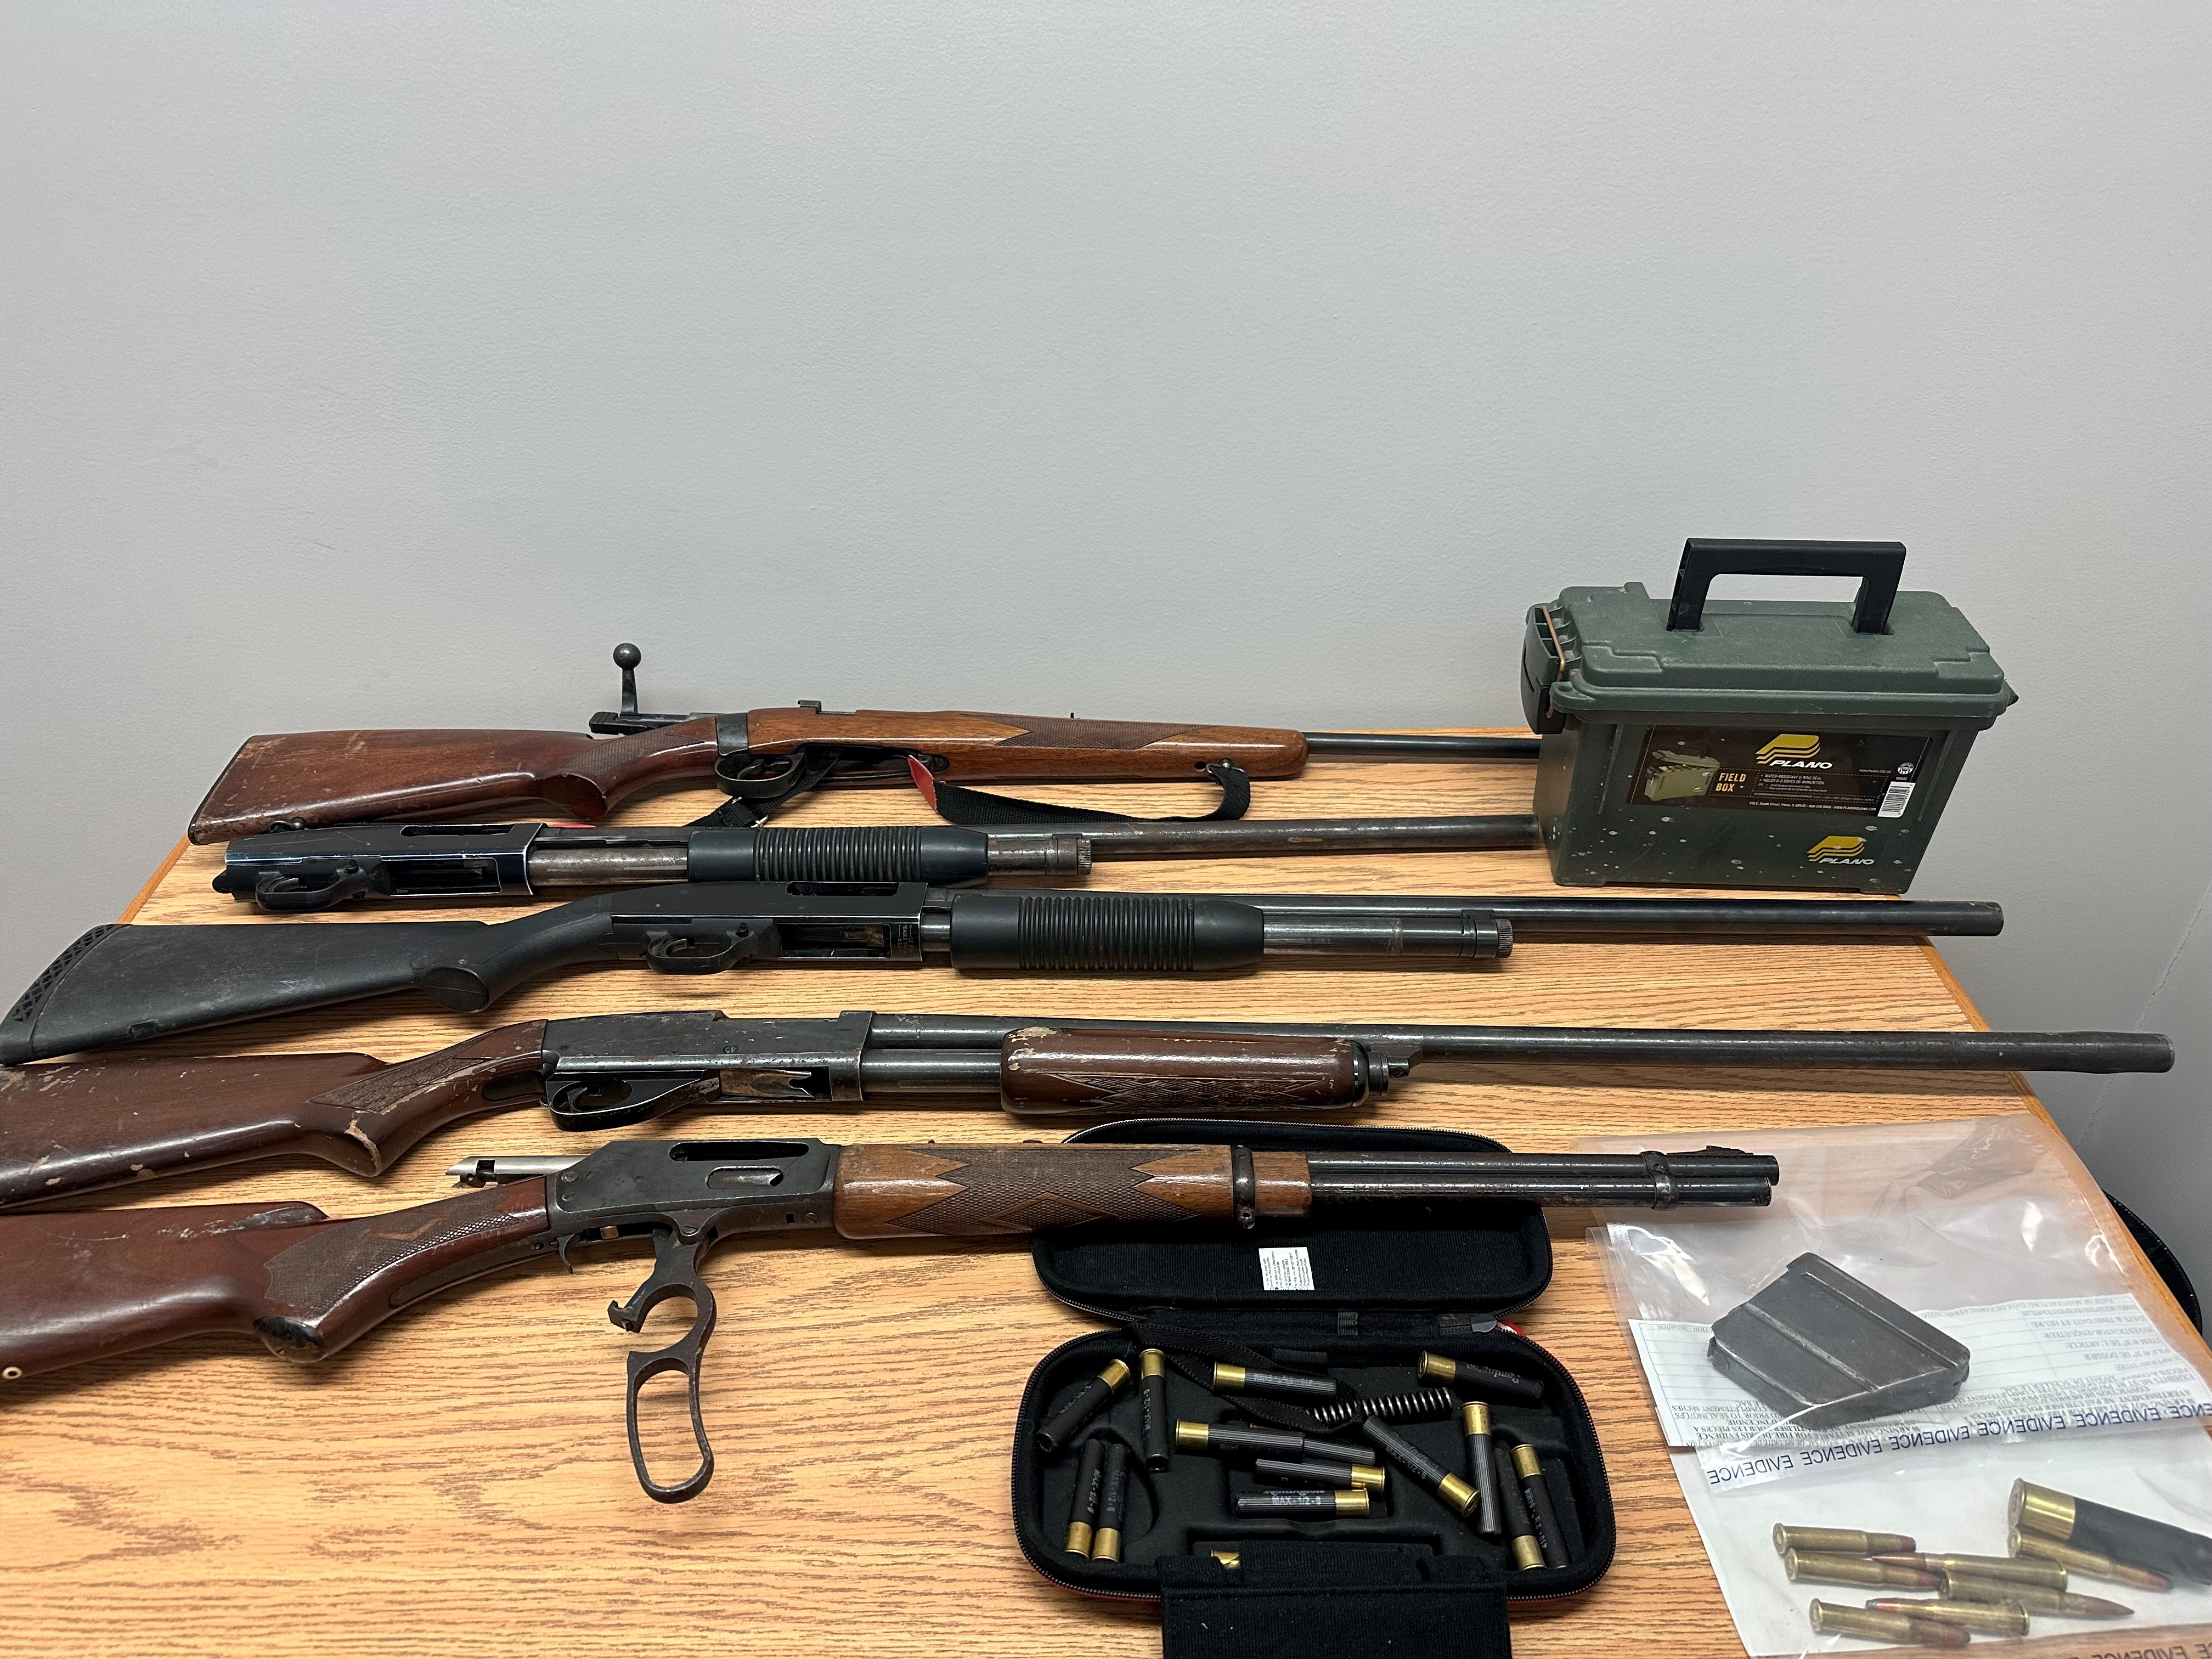 Two arrested, weapons seized, following incident in Manitoba community